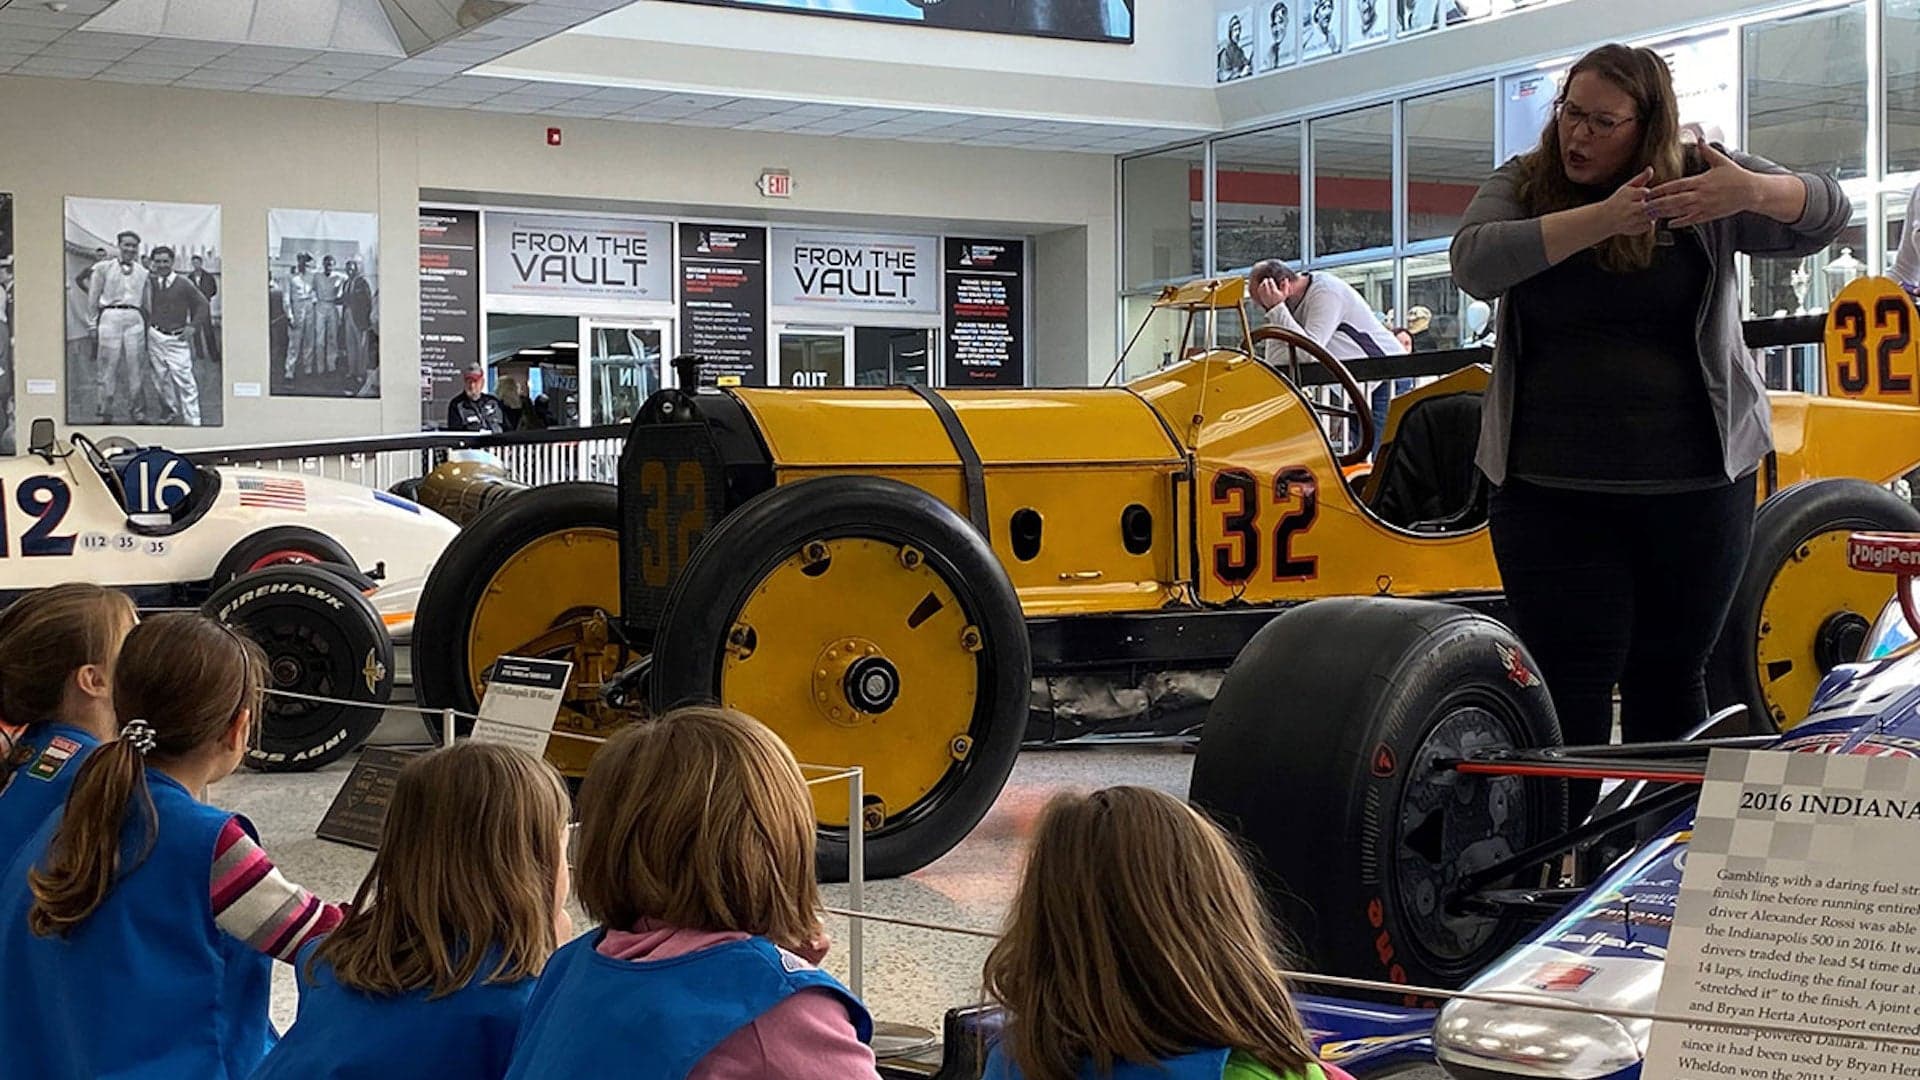 Teaching Your Kids Lately? Here’s Some Fun Racing Physics Lessons From the Indy Motor Speedway Museum